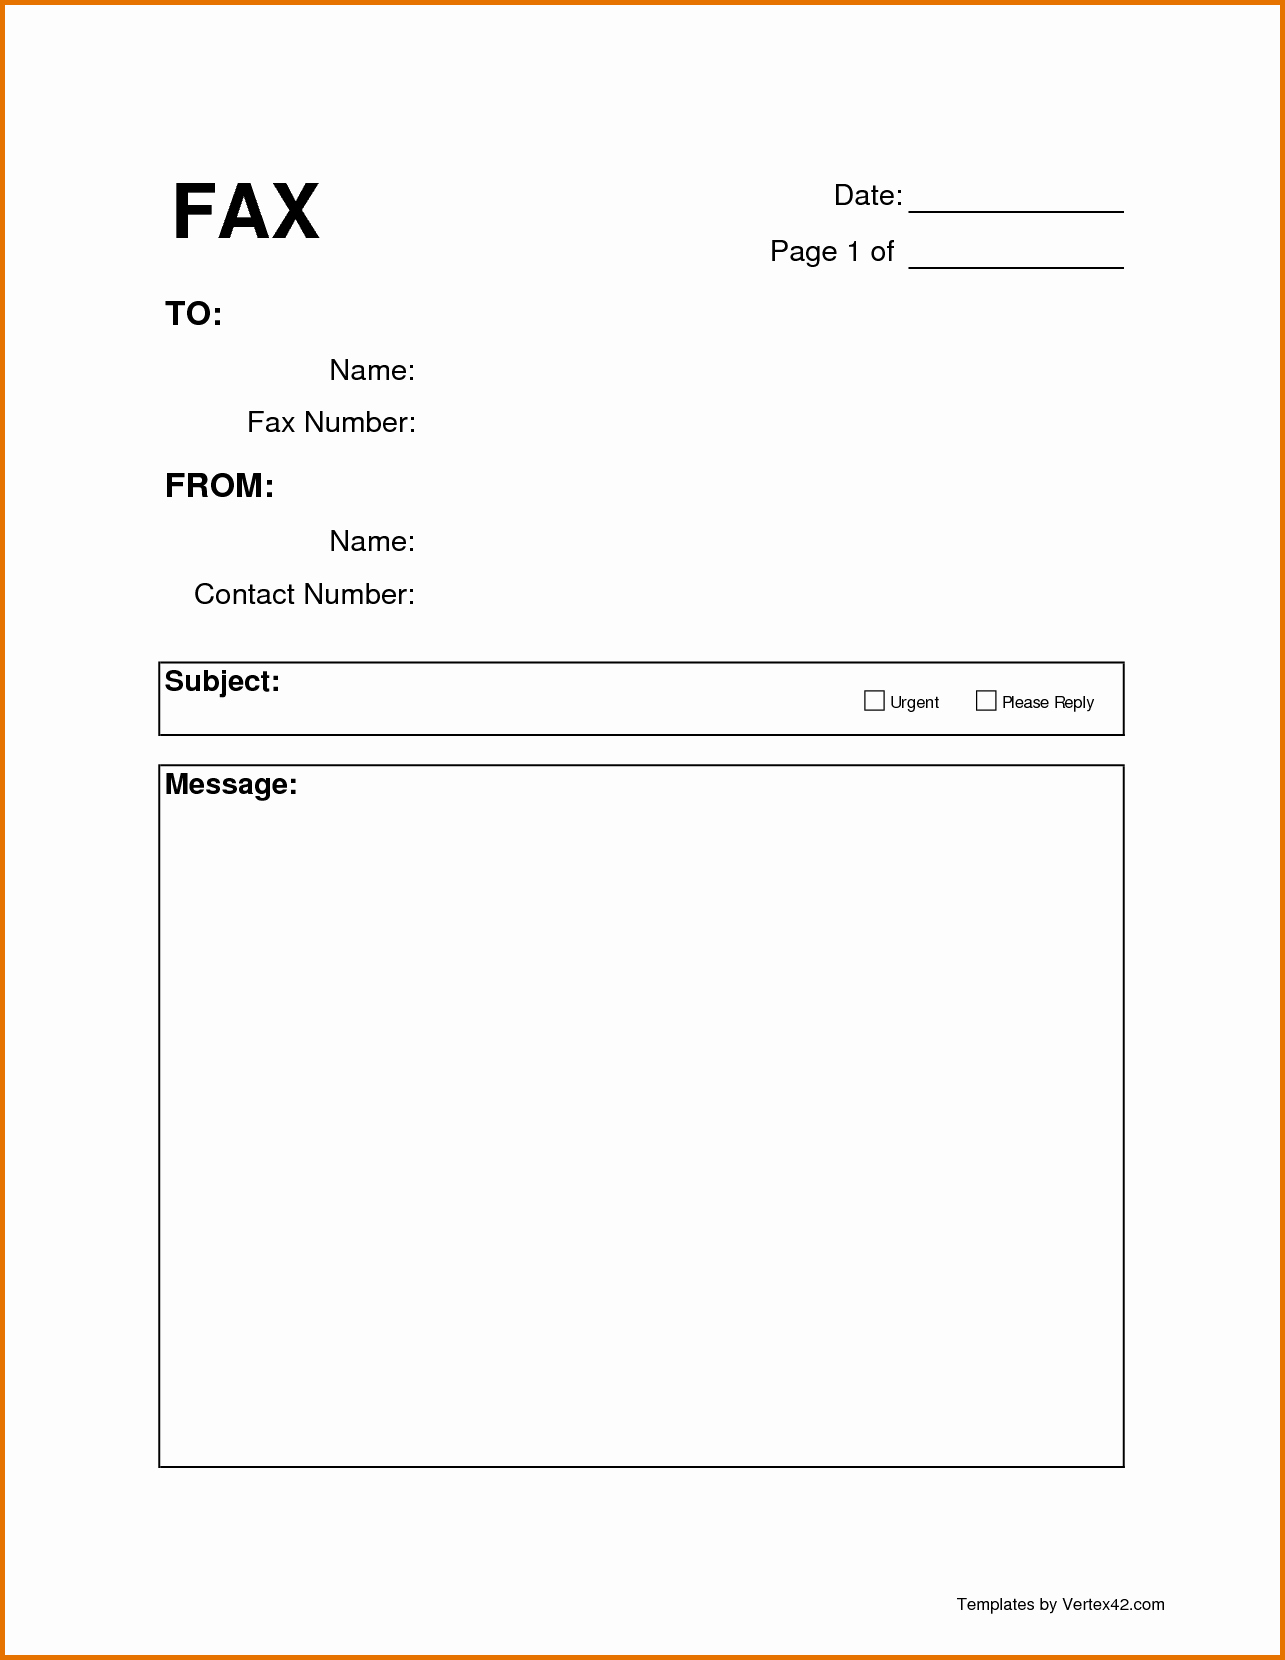 Free Fax Cover Sheet Templates Luxury 6 Blank Fax Cover Sheetreference Letters Words